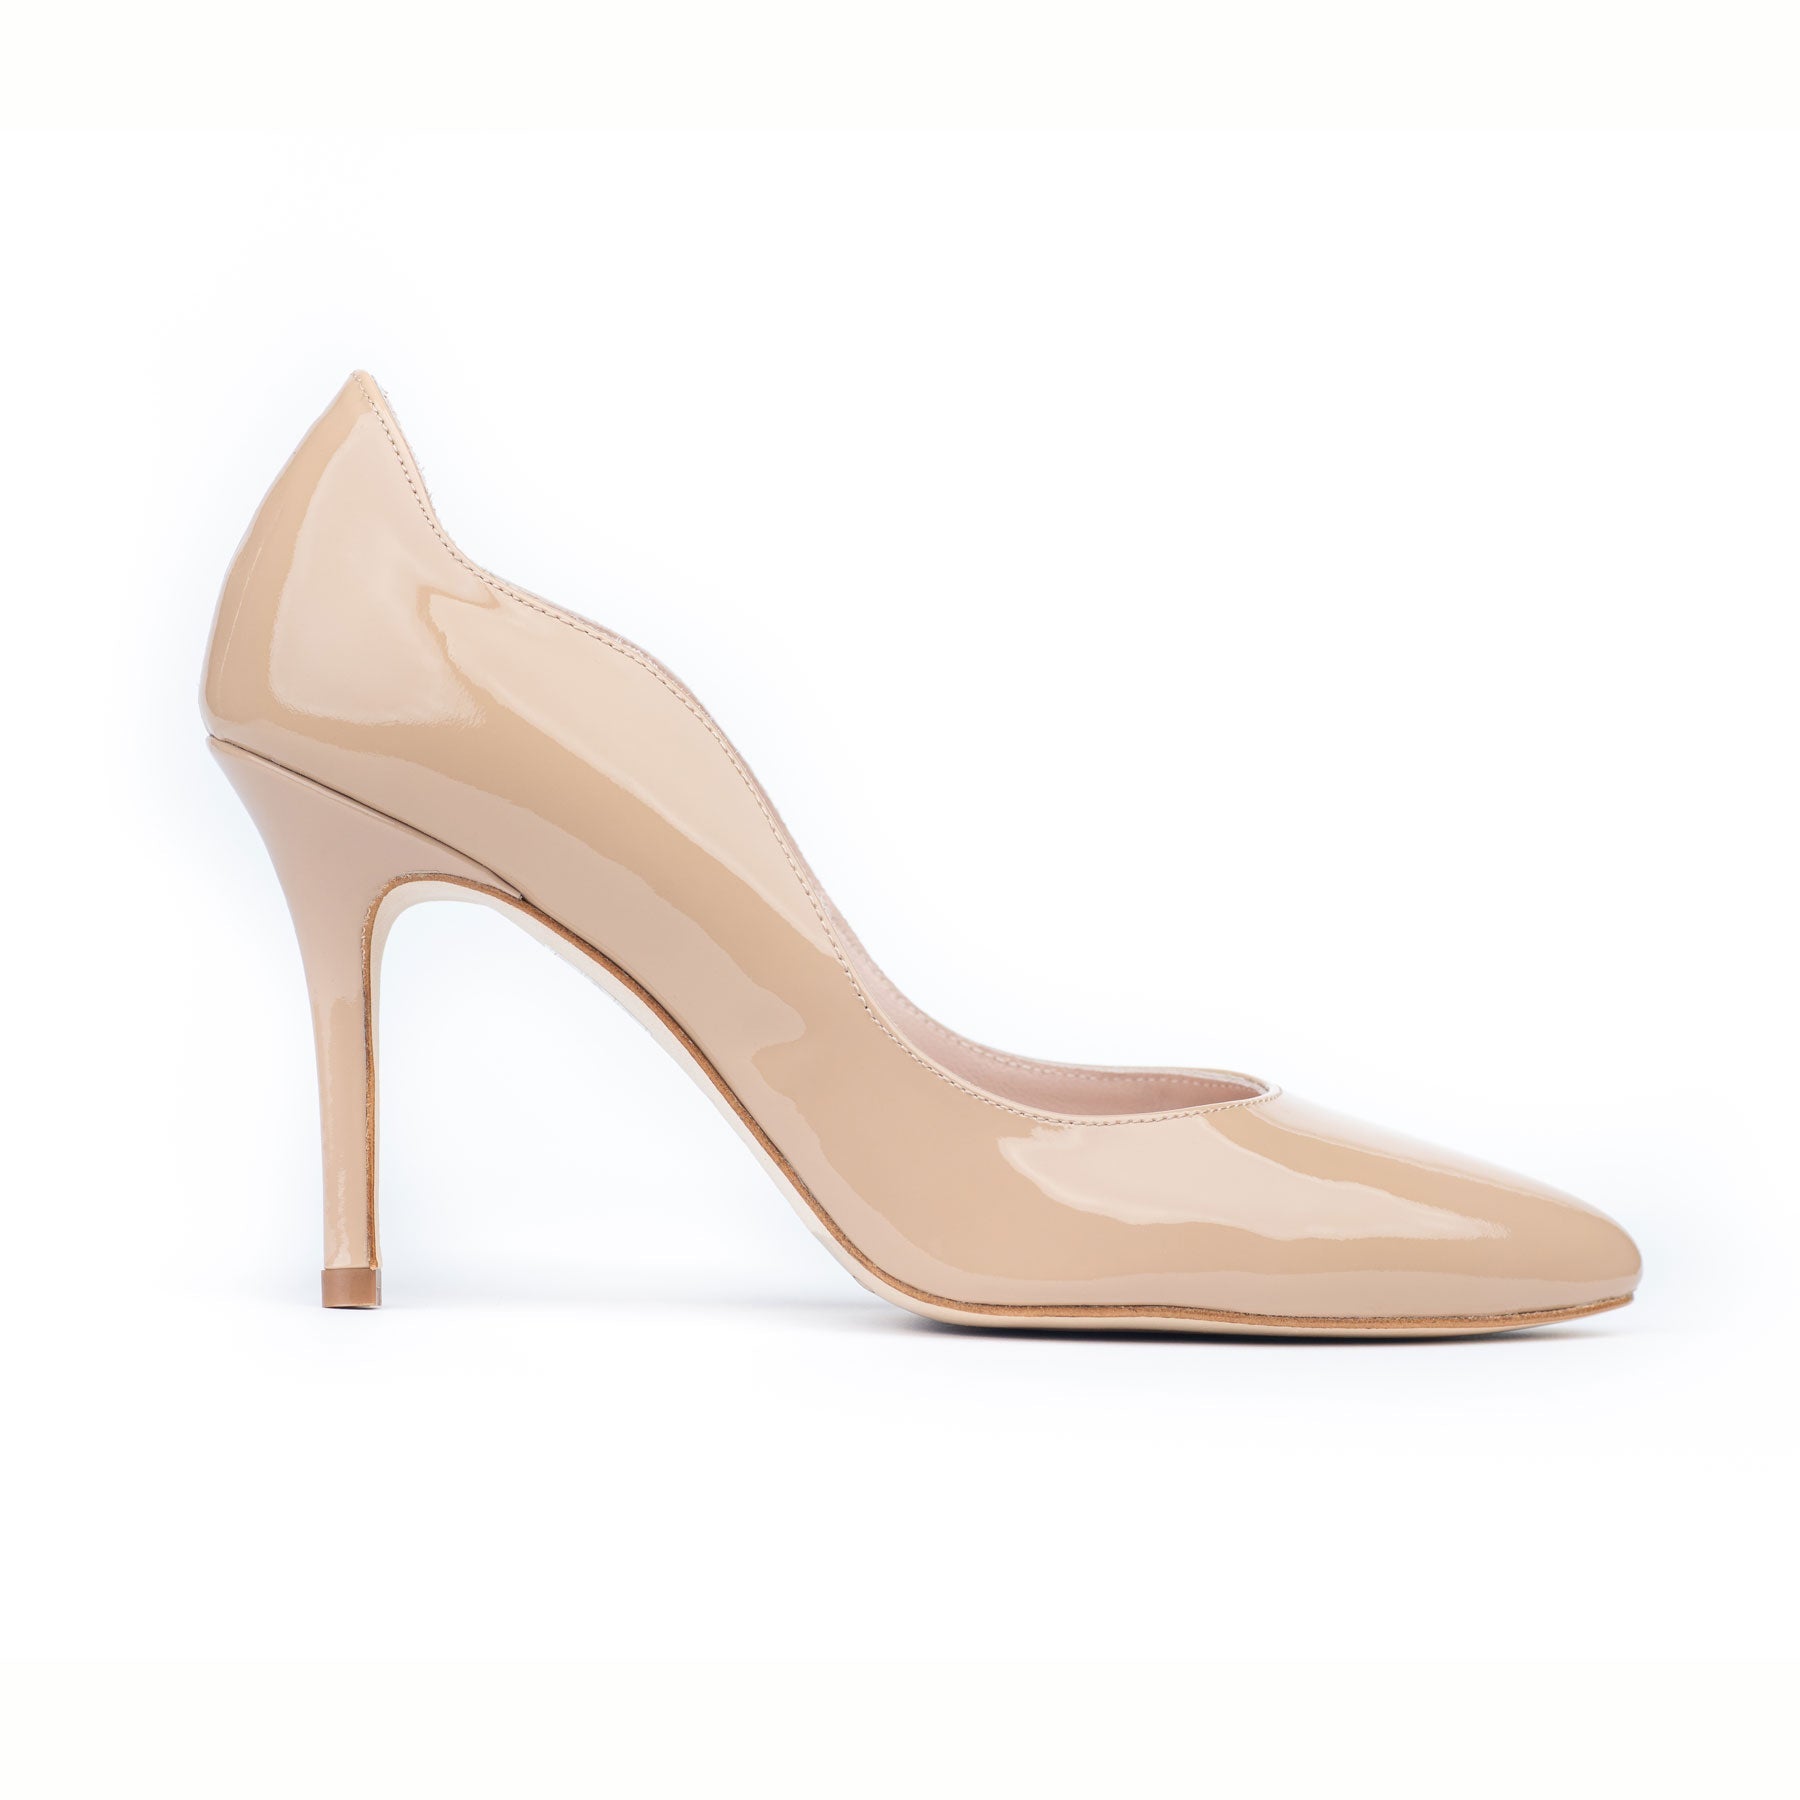 The Oleah Classic 85 - Beige Nude factory outlet